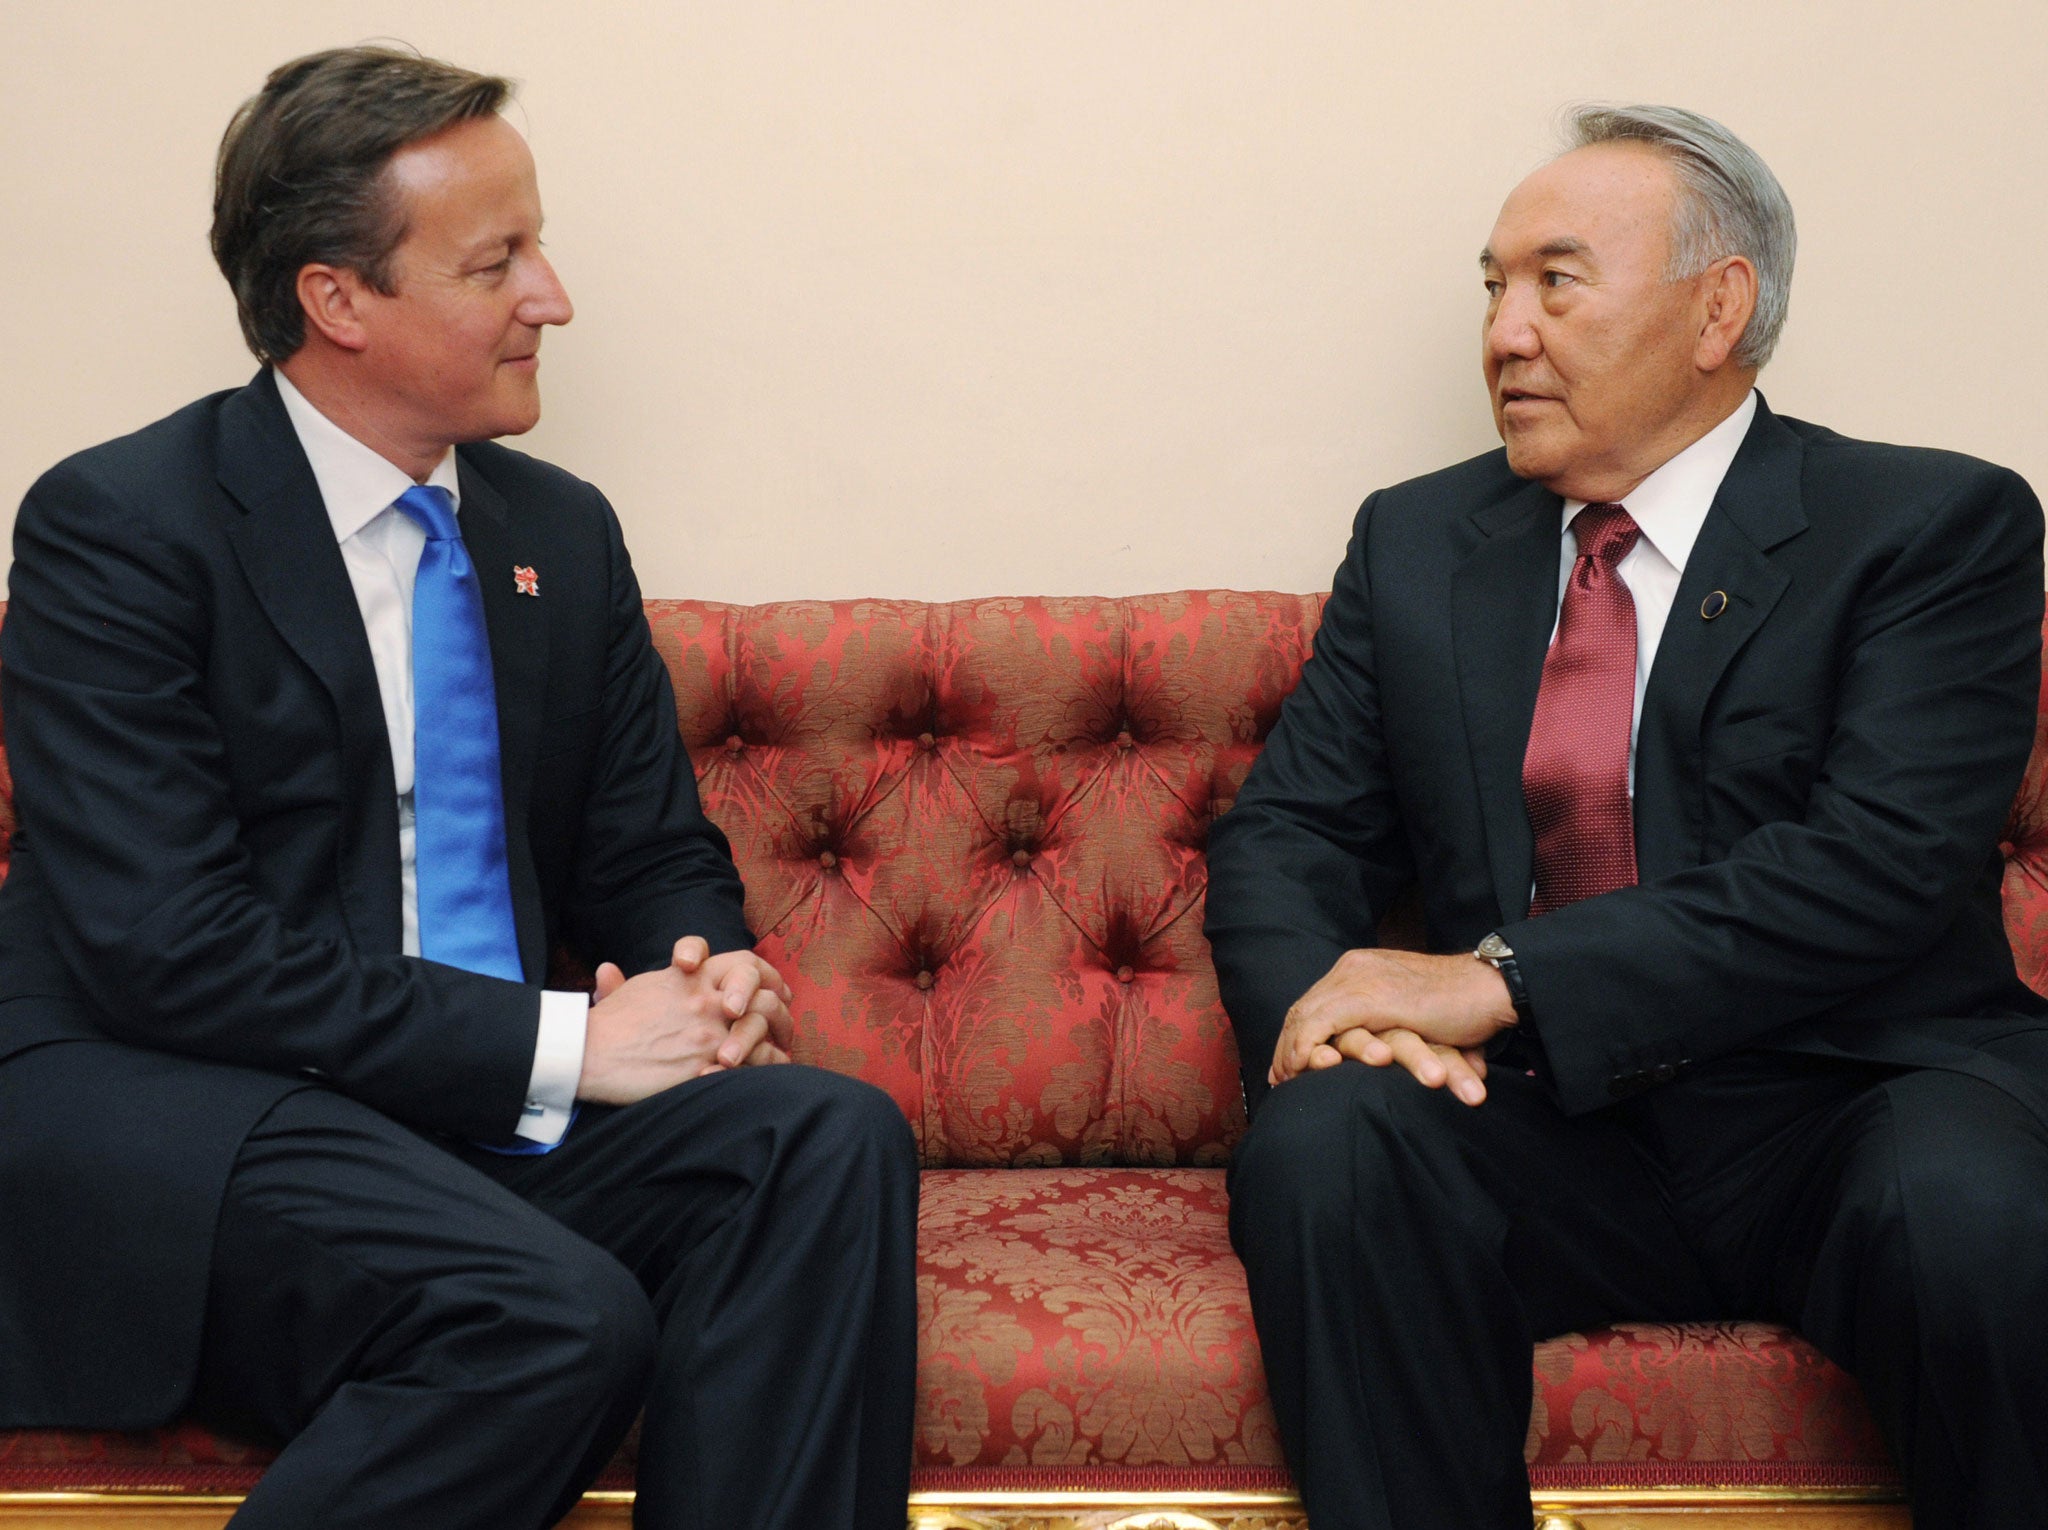 Prime Minister David Cameron chats with President of Kazakhstan Nursultan Nazarbayev at a reception at Buckingham Palace for Heads of State and Government attending the Olympics Opening Ceremony on July 27, 2012 in London, England.